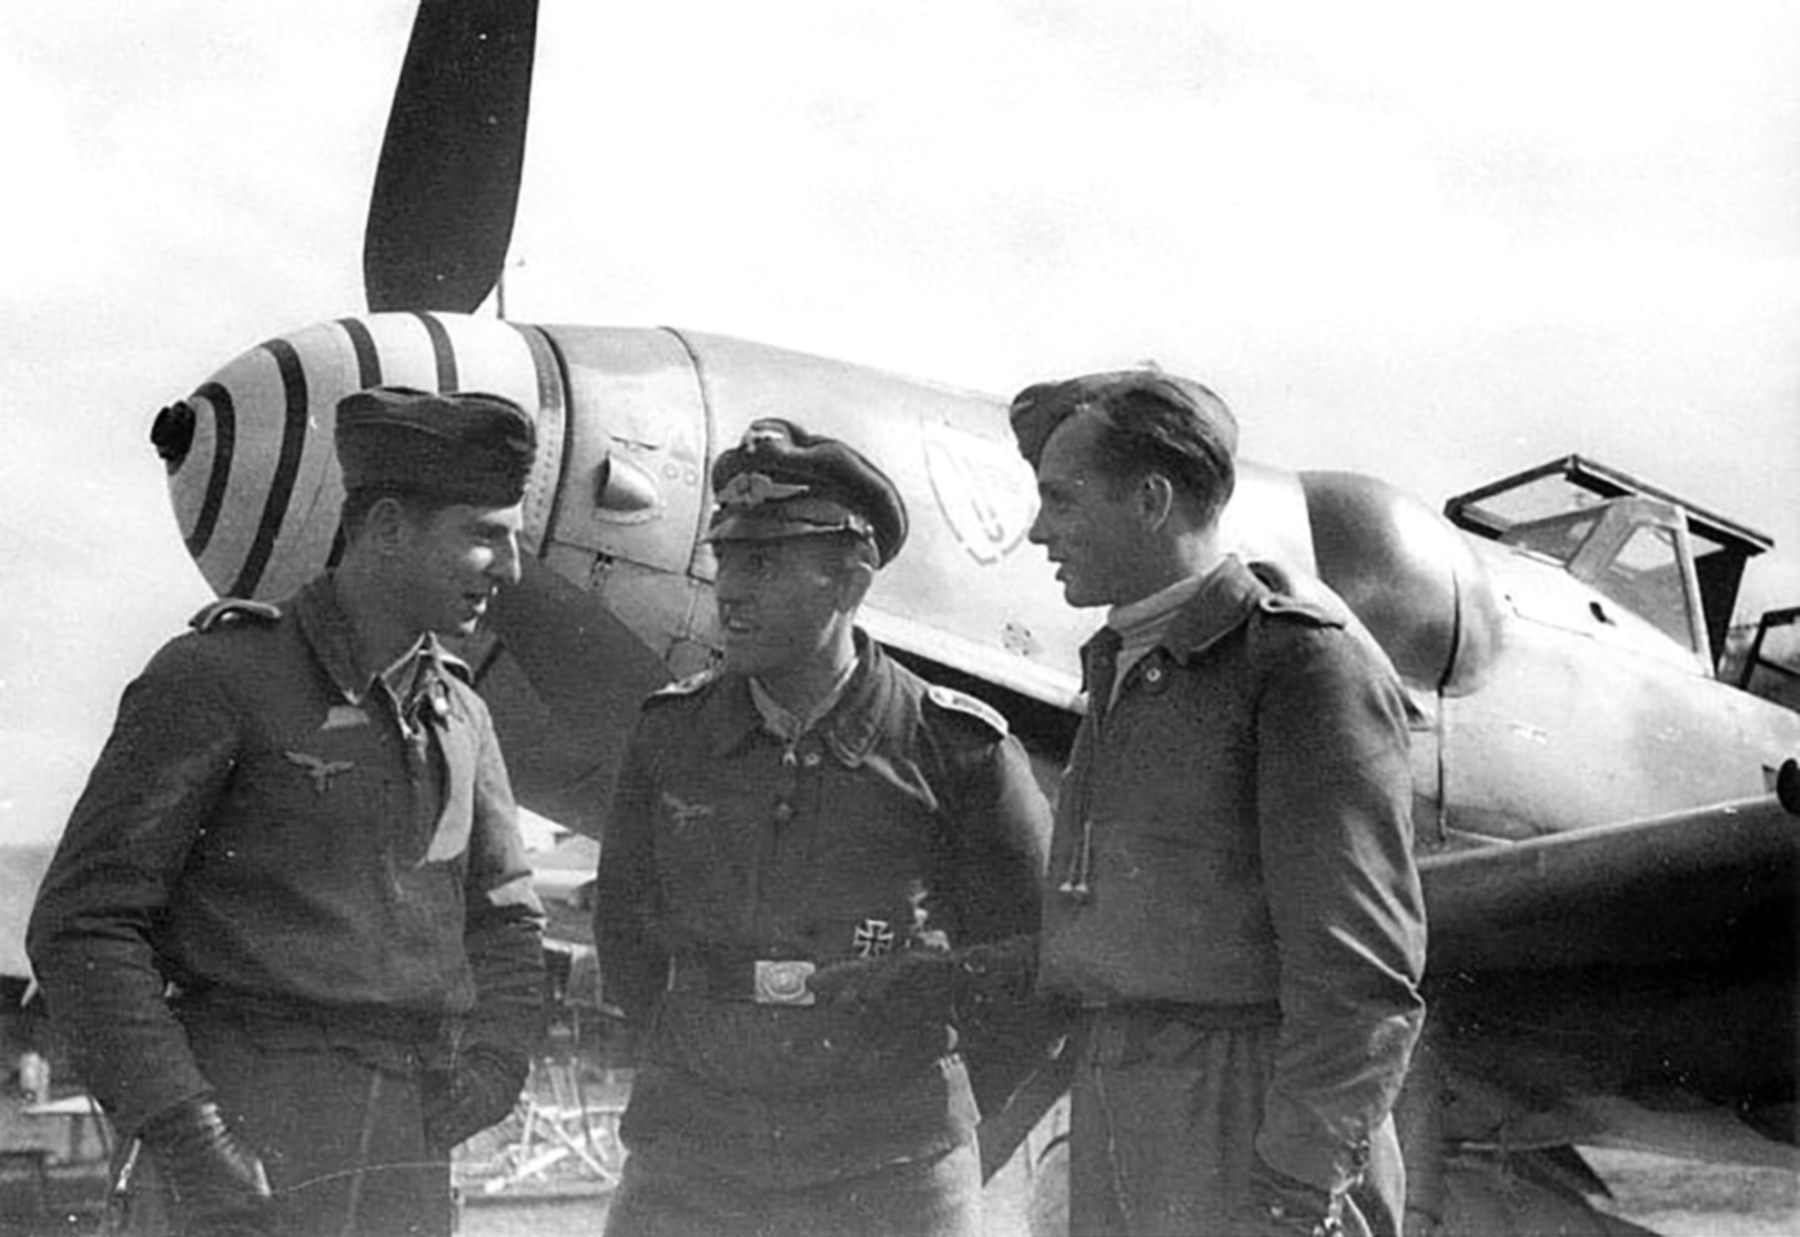 Aircrew Luftwaffe JG3 pilots stand in front of Bf 109G6 01